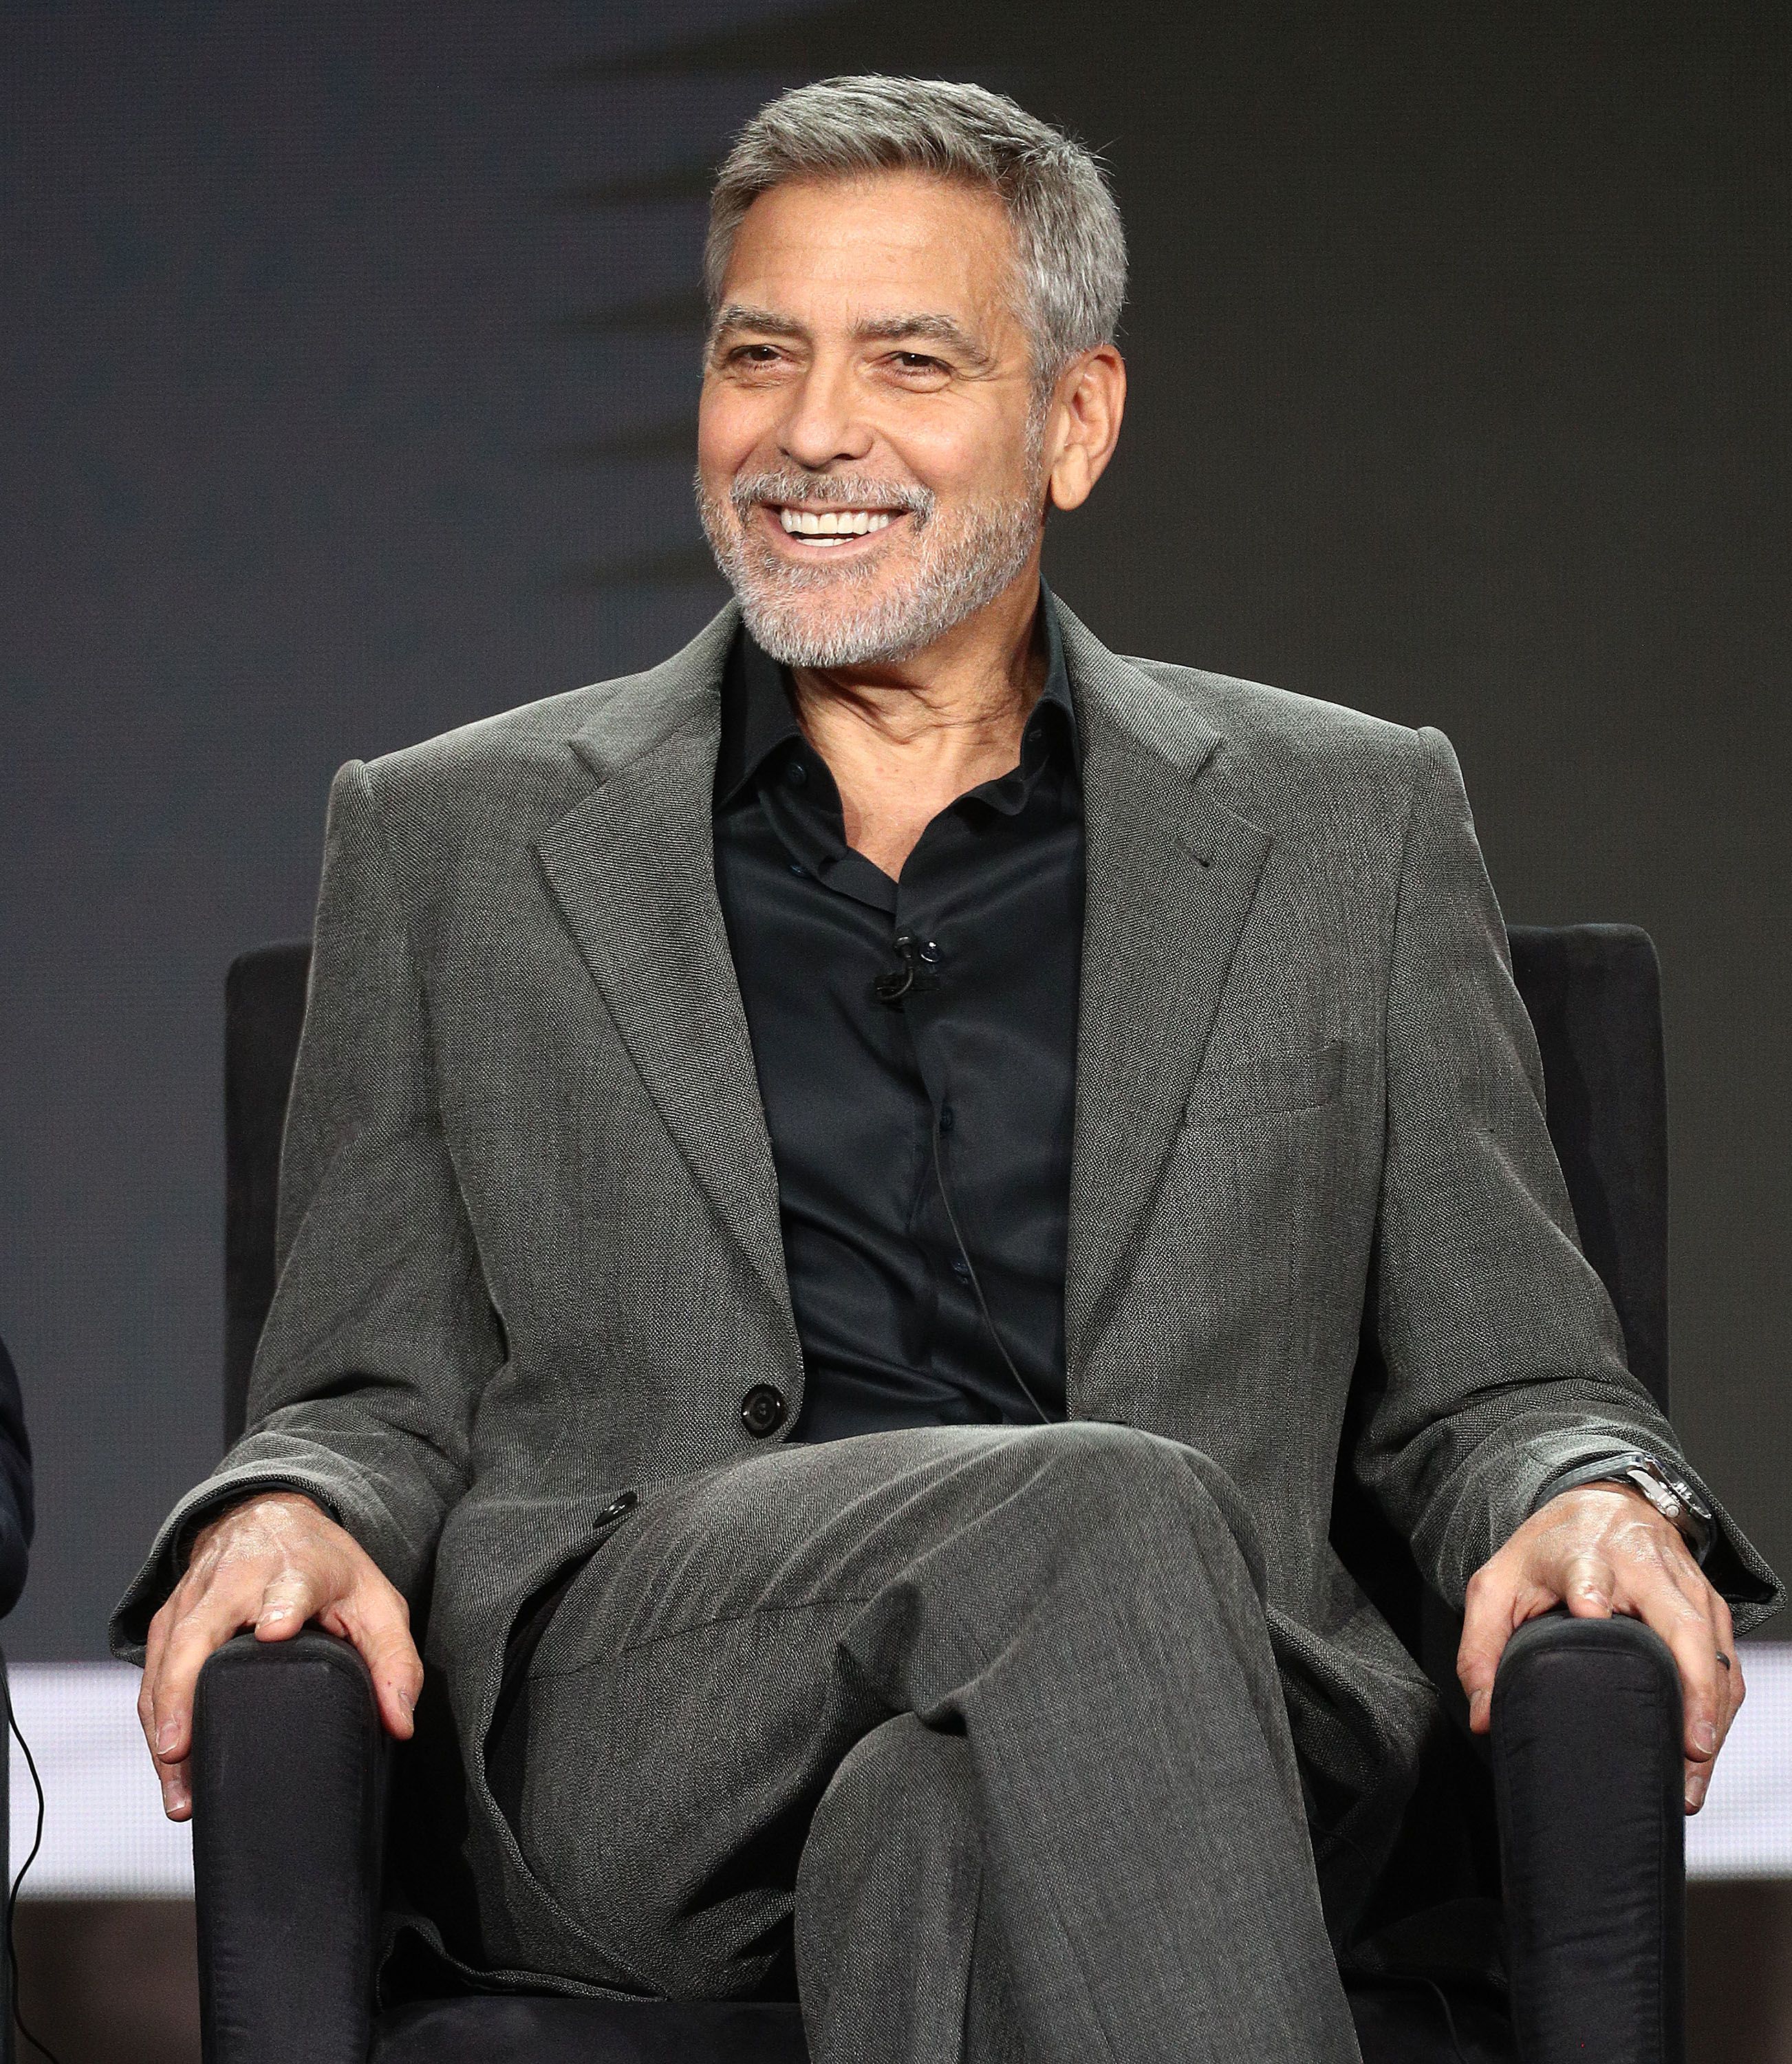 George Clooney of the television show "Catch 22" speaks at the Hulu segment of the 2019 Winter Television Critics Association Press Tour at The Langham Huntington, Pasadena on February 11, 2019 | Photo: Getty Images